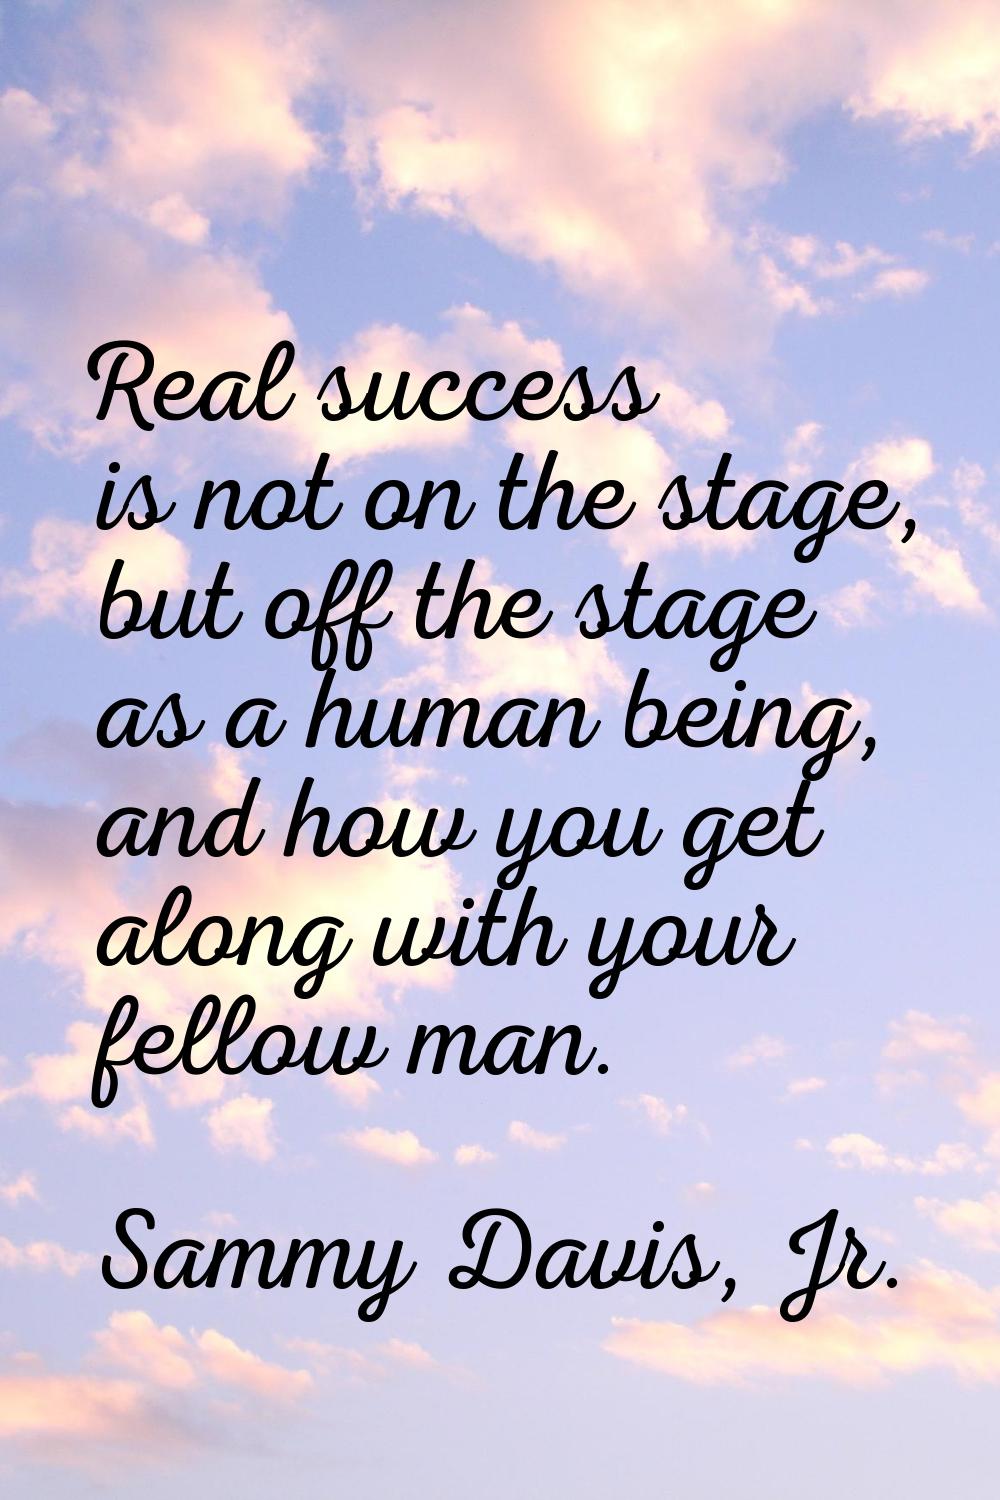 Real success is not on the stage, but off the stage as a human being, and how you get along with yo